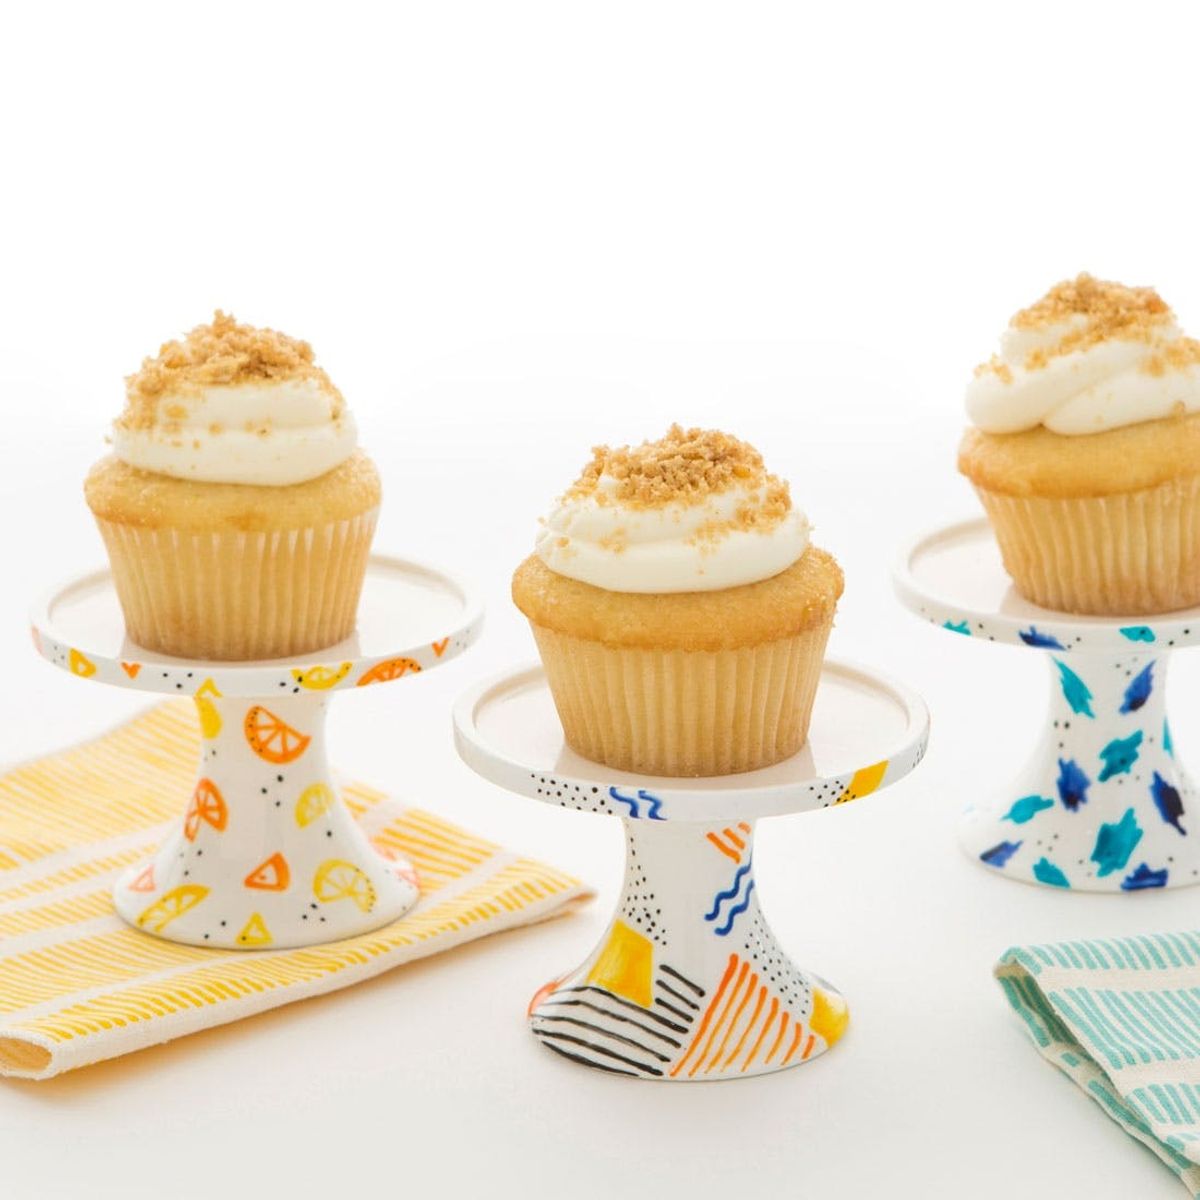 Take Brunch to the Next Level With DIY Mini Cupcake Stands